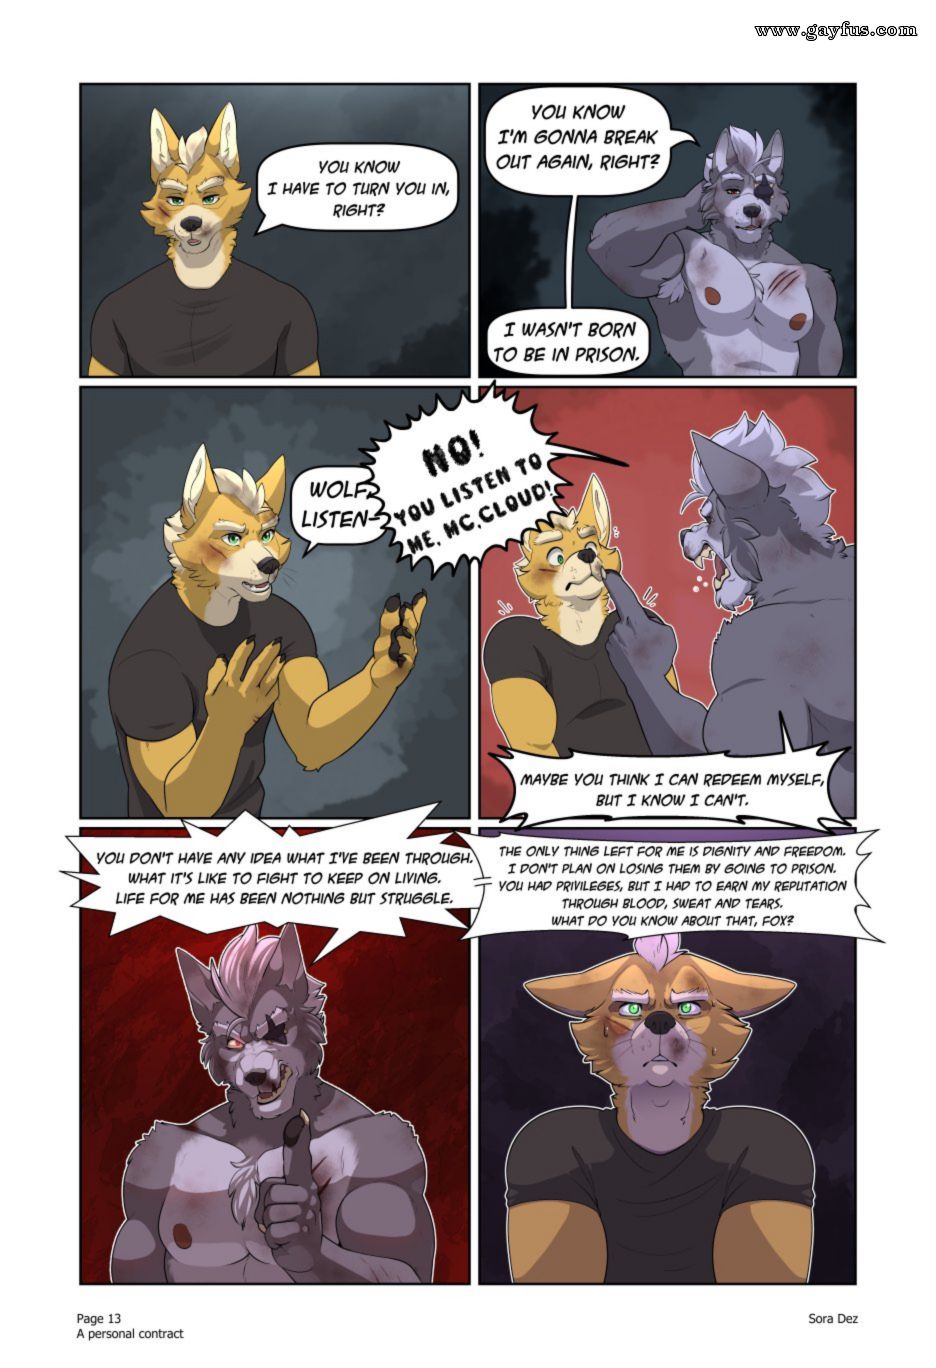 Page 14 Sora-Dez-WolFox/A-Personal-Contract Gayfus picture